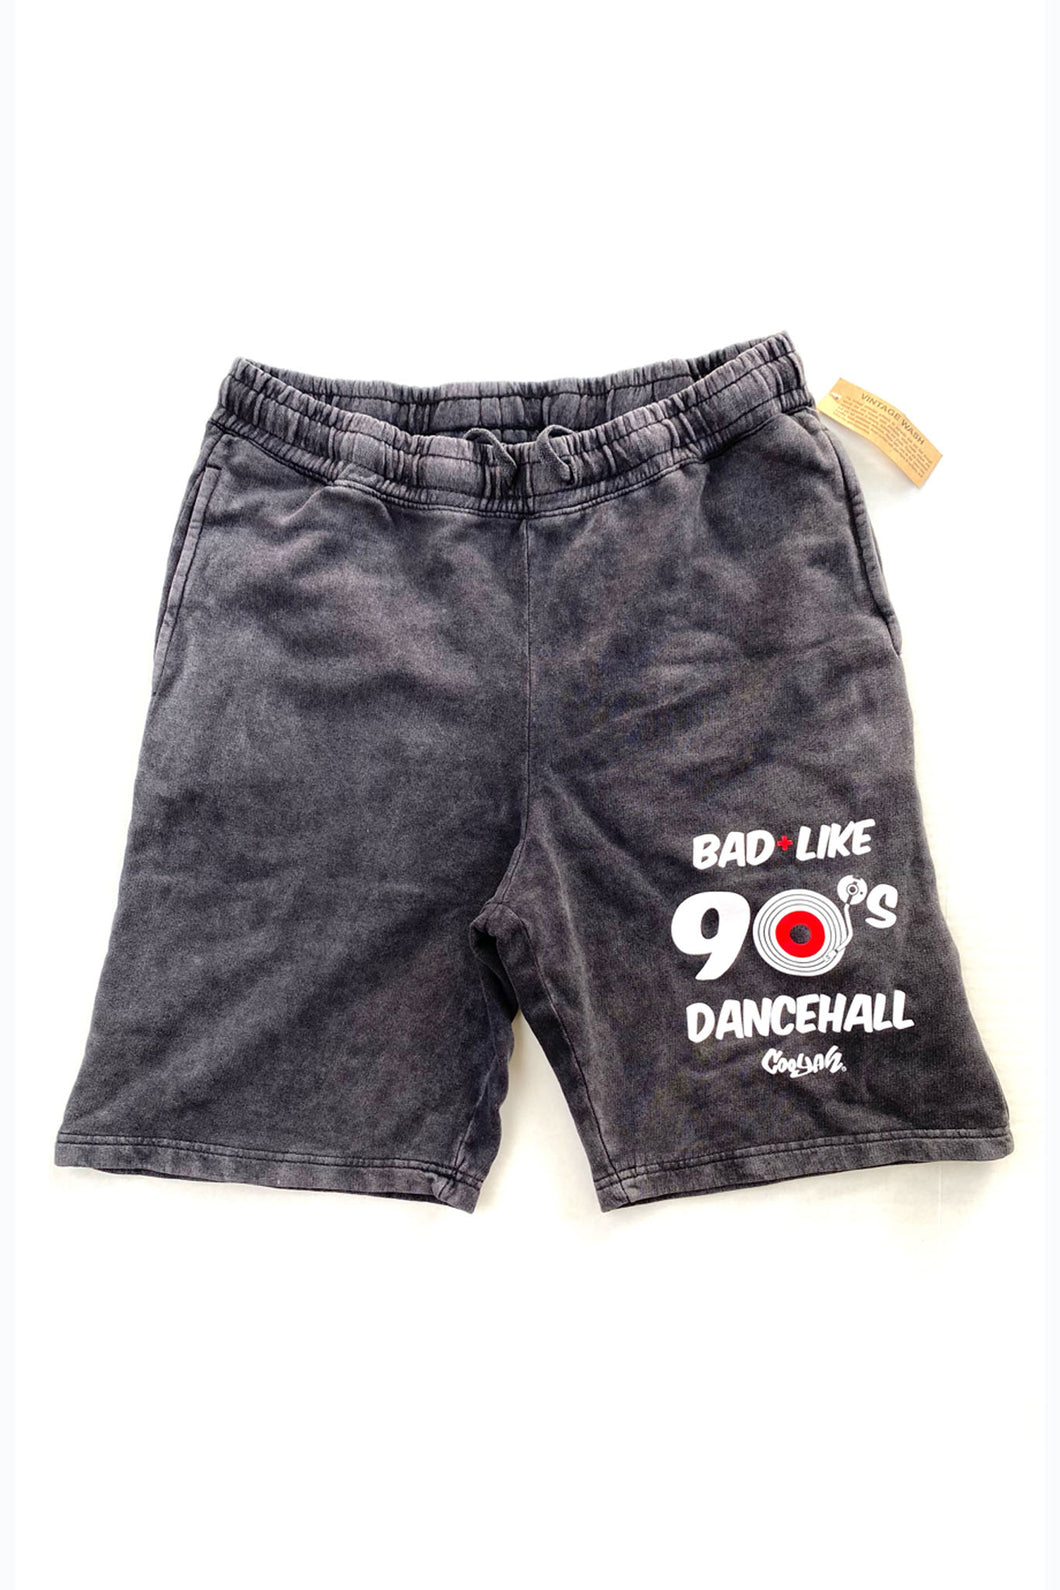 Cooyah Jamaica.  Bad Like 90's Dancehall fleece shorts.  We are a Jamaican owned clothing brand since 1987.  